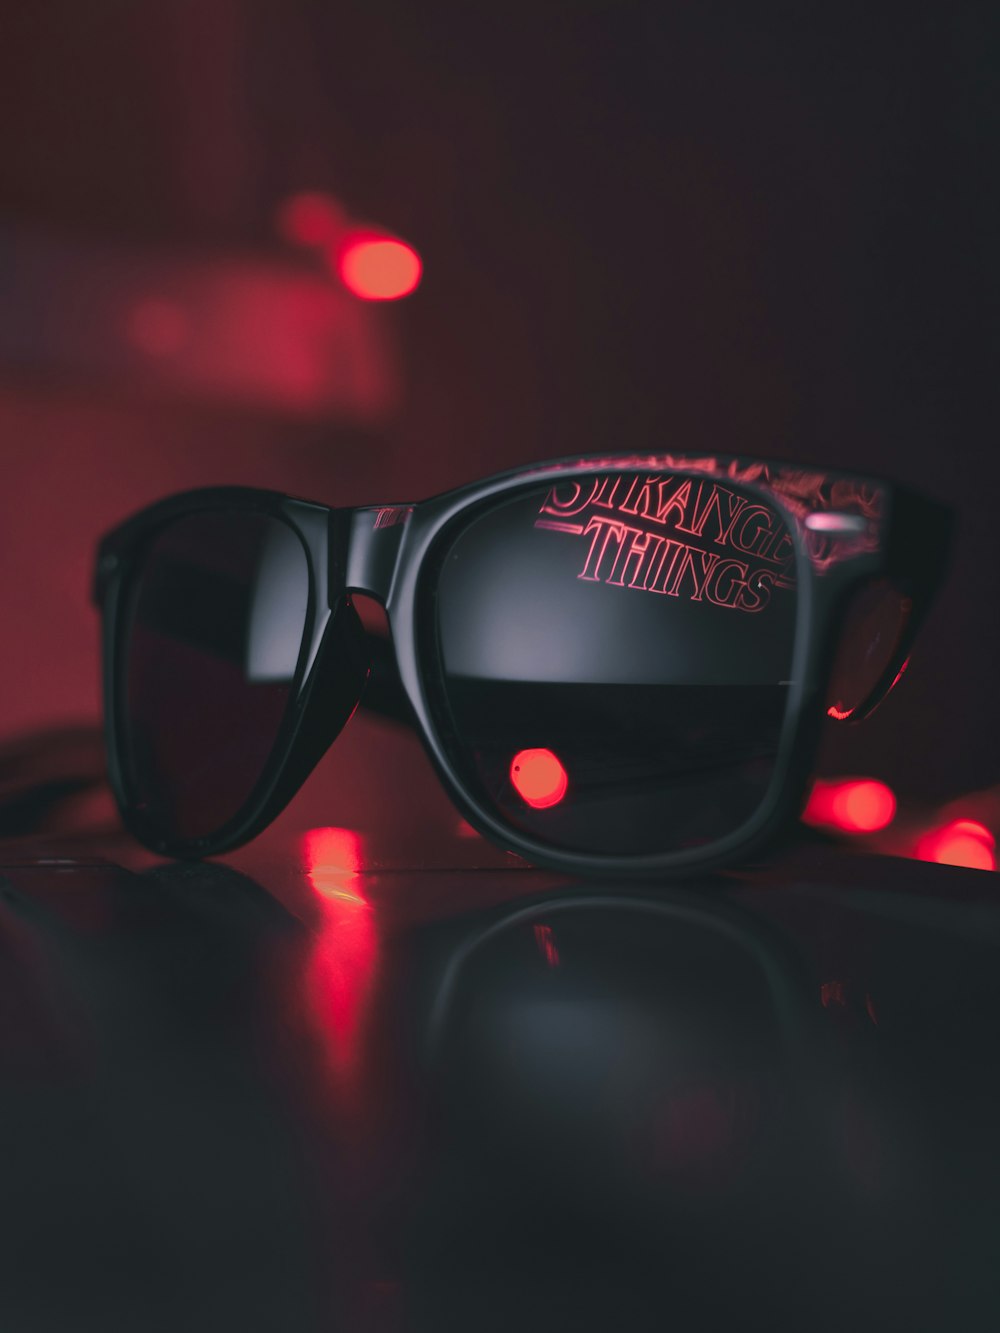 100+ Sunglass Pictures | Download Free Images on Unsplash